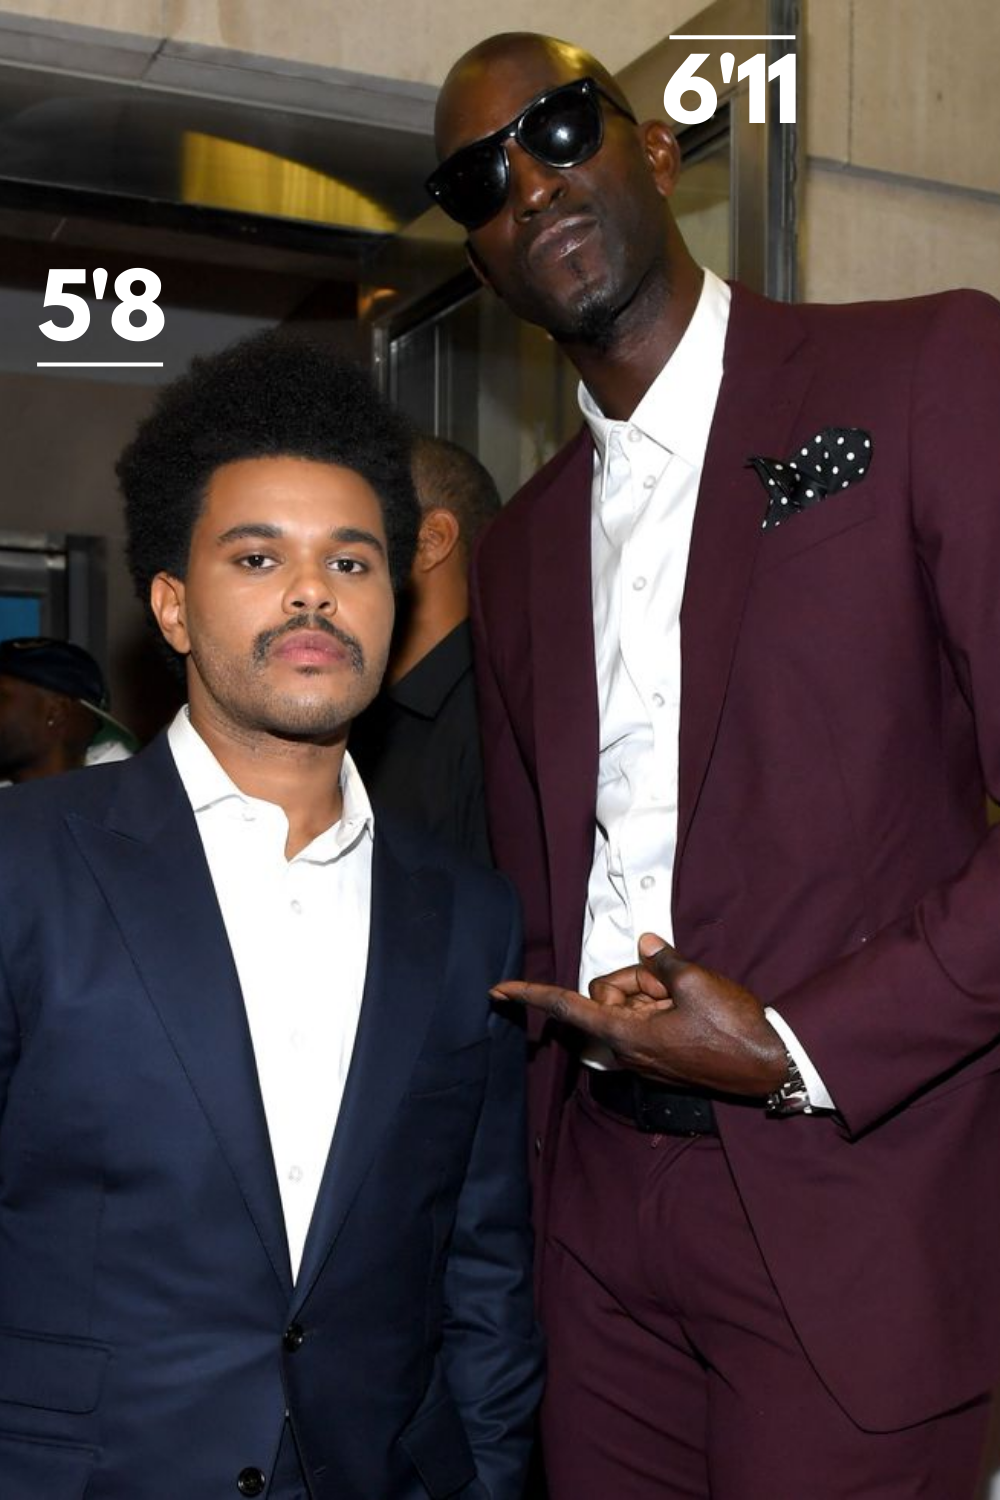 KEVIN GARNETT and the weeknd